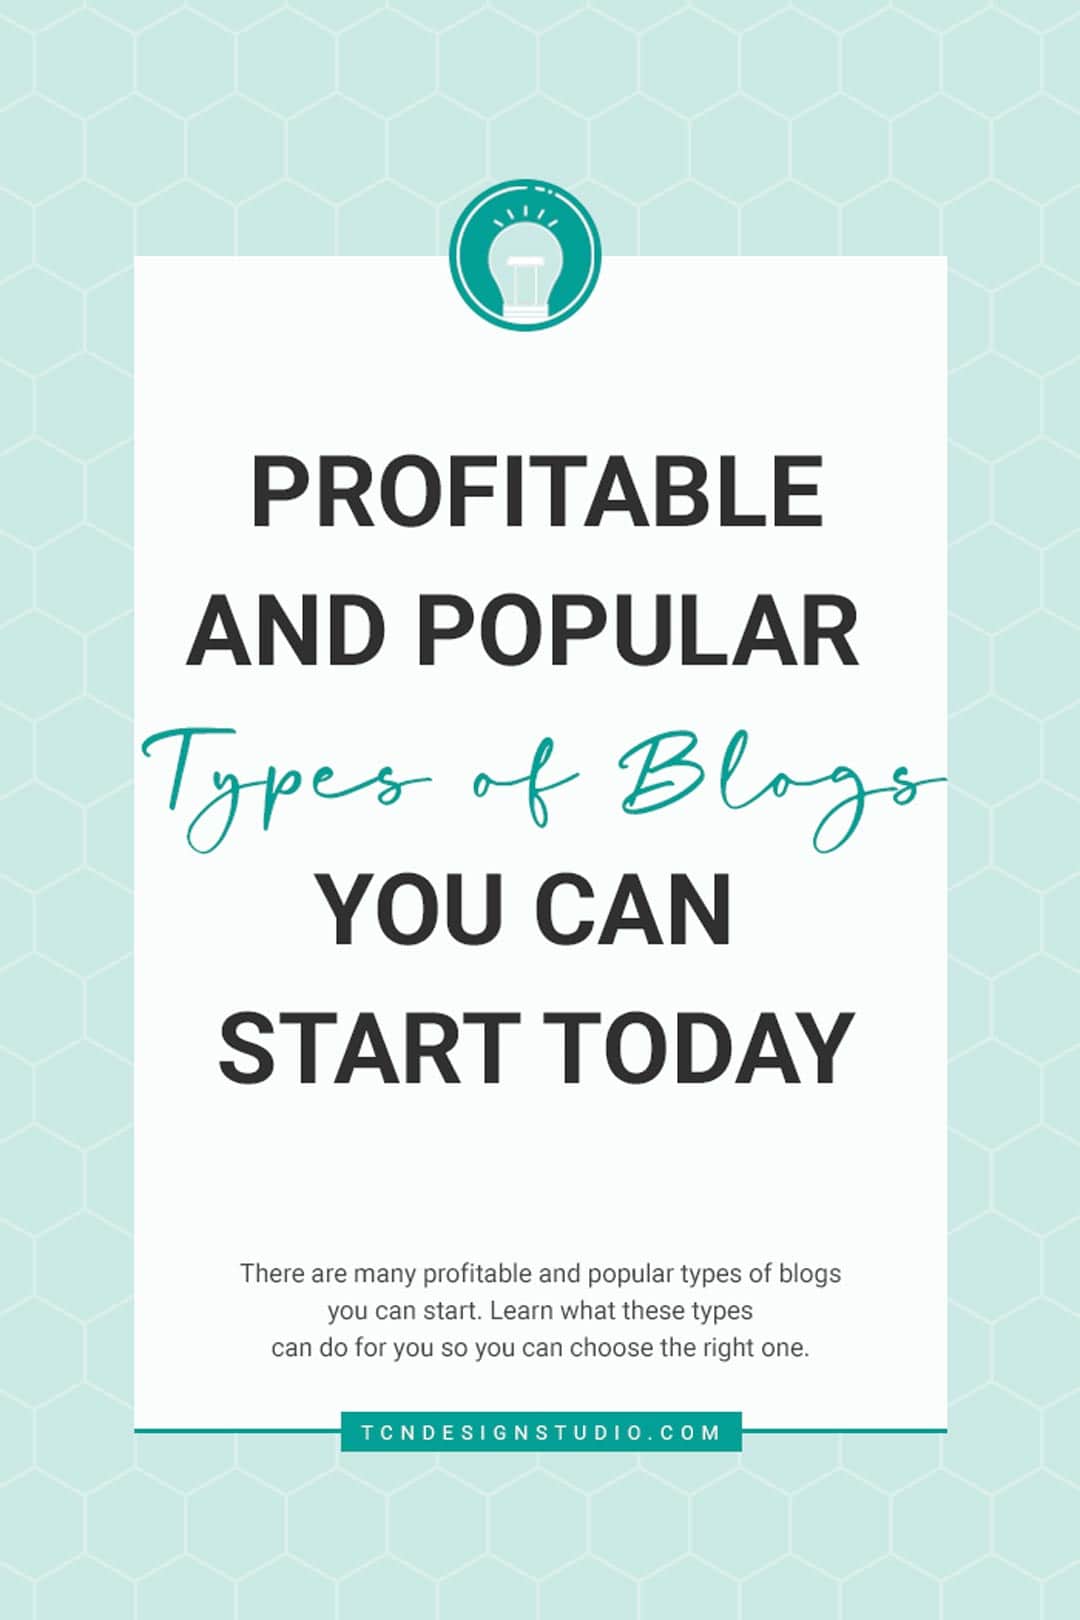 9 Profitable and Popular Types of Blogs You Can Start Today